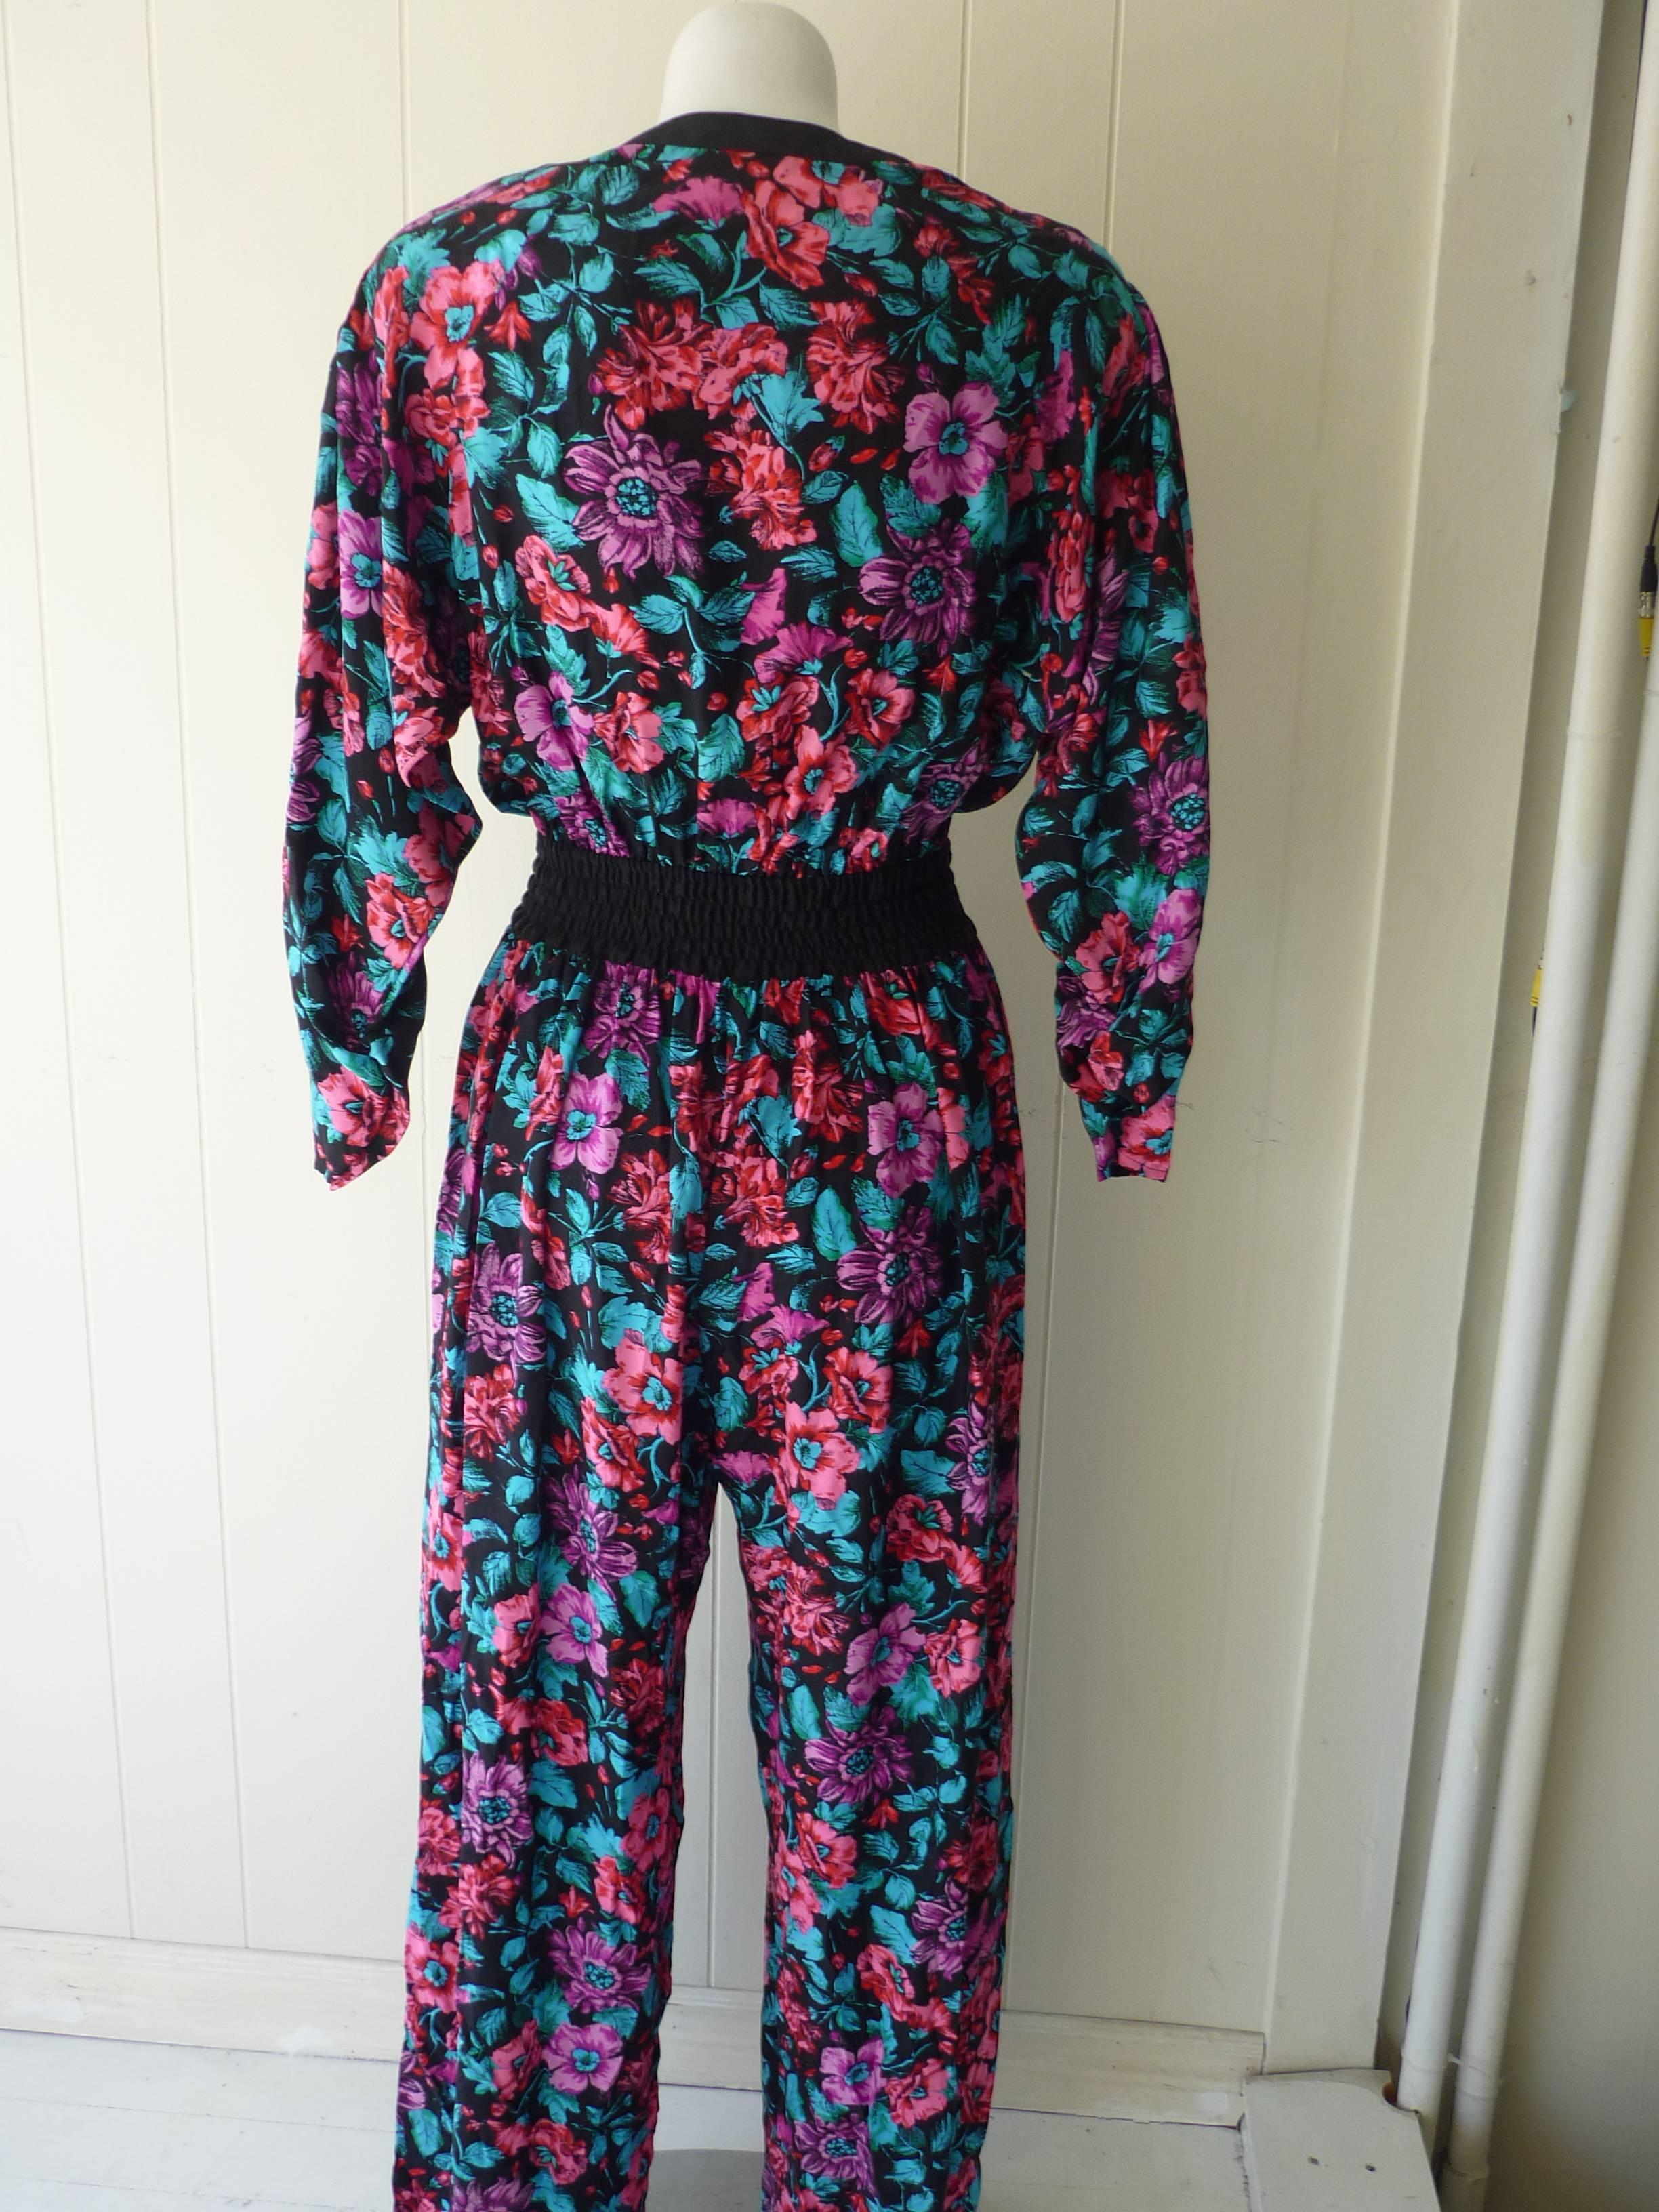 This silk floral print jumpsuit with palazzo legs and padded shoulders is typical of Diane Freis's Boho style.

The sleeves are gathered and come to a point; closures is by a gold and diamante button and hidden buttons; the waist is elasticized